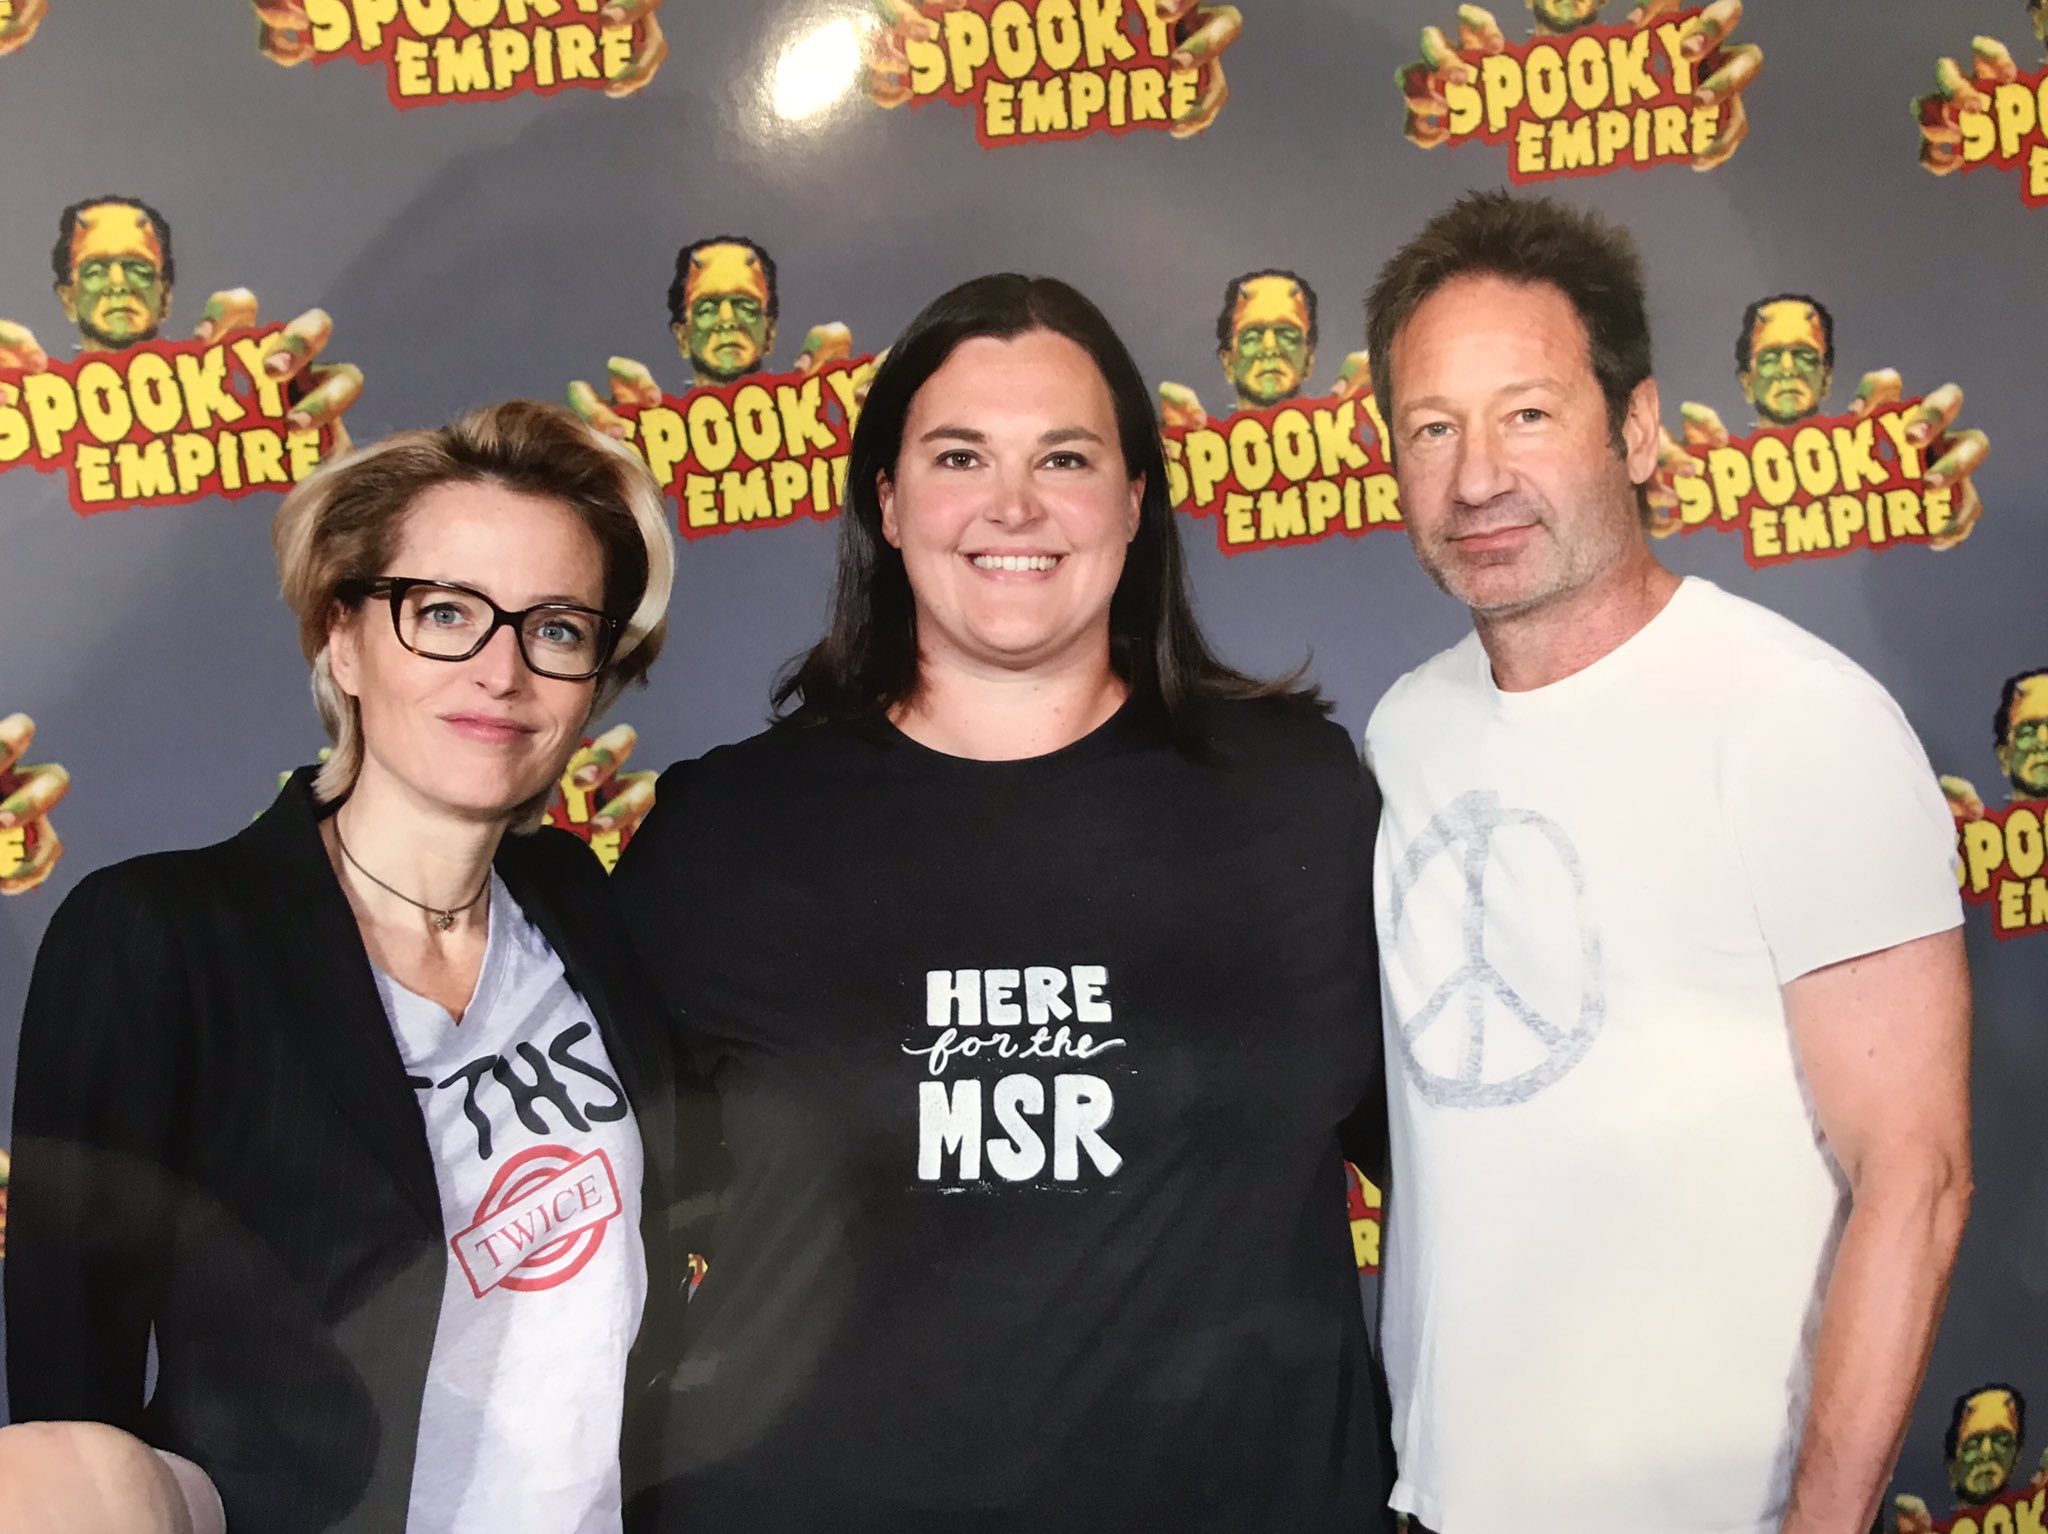 2018/10/27 - David at Spooky Empire at Caribe Royale Orlando - Page 2 Dqh_EOCXQAI4m2t